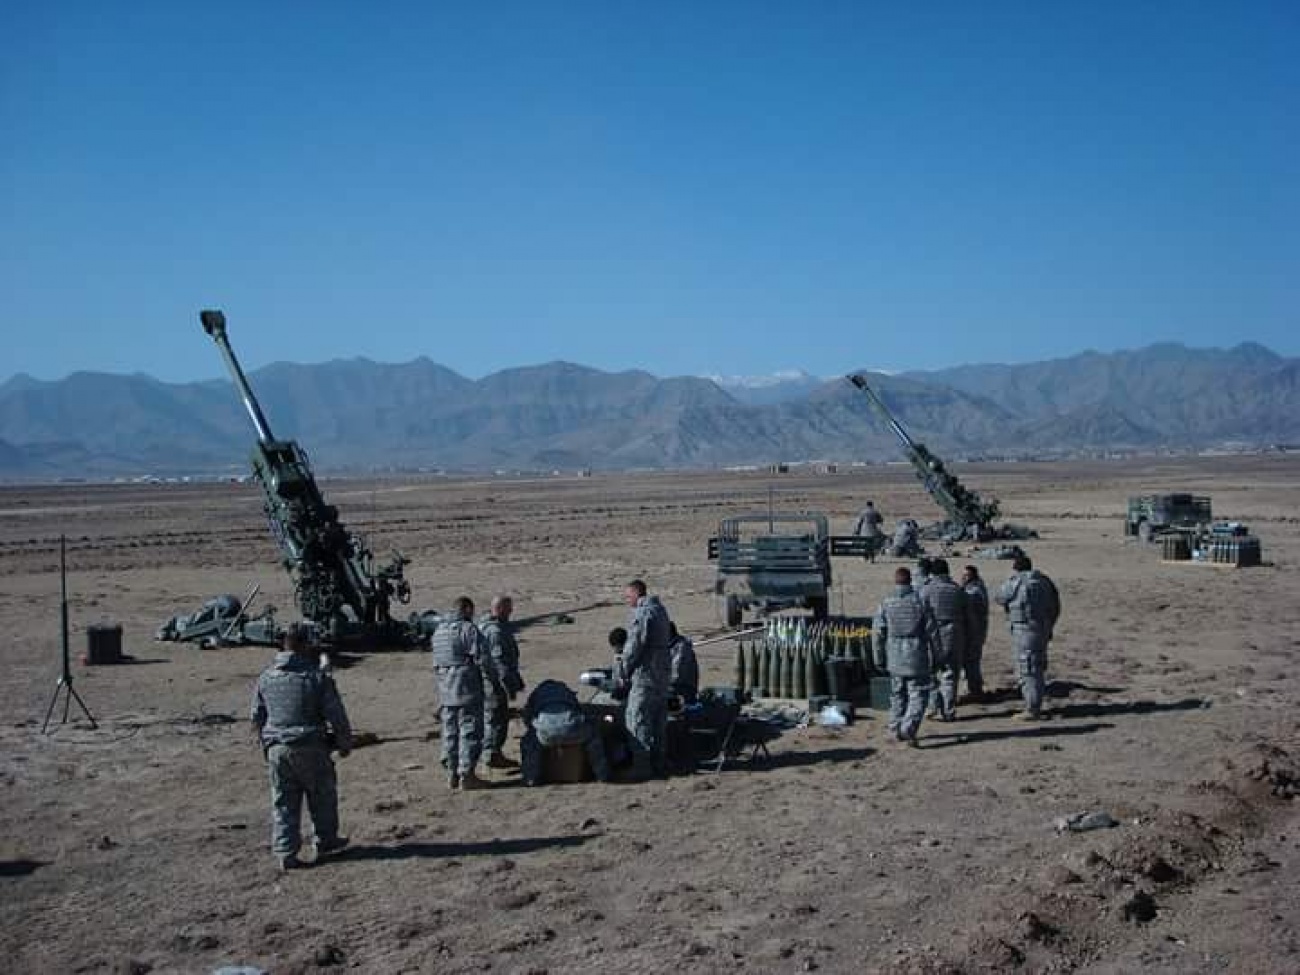 M777A2 howitzers in Khost